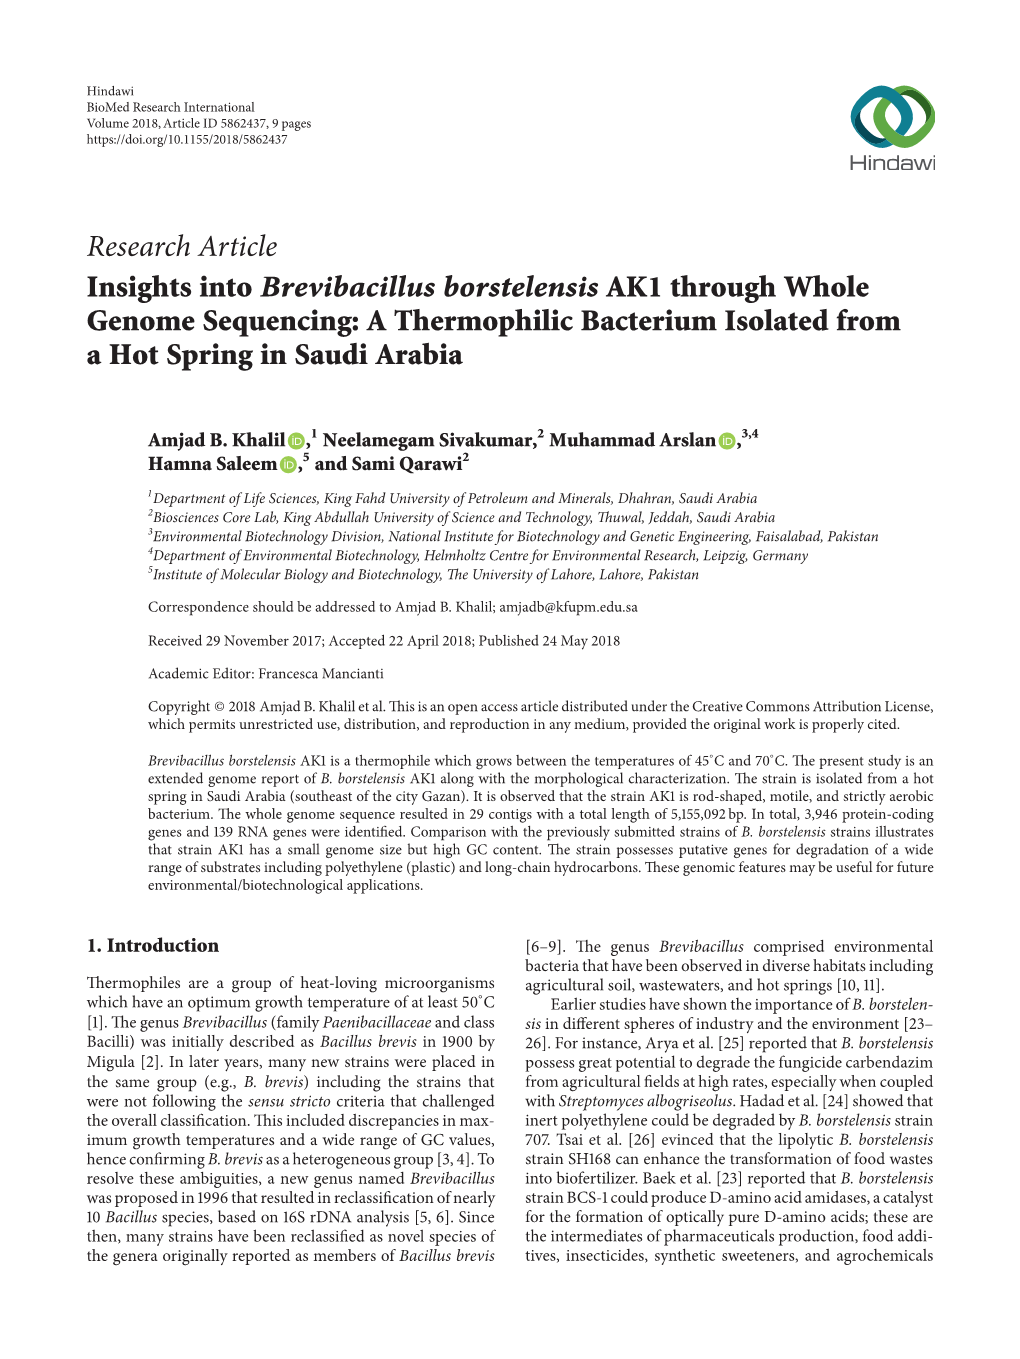 Research Article Insights Into Brevibacillus Borstelensis AK1 Through Whole Genome Sequencing: a Thermophilic Bacterium Isolated from a Hot Spring in Saudi Arabia